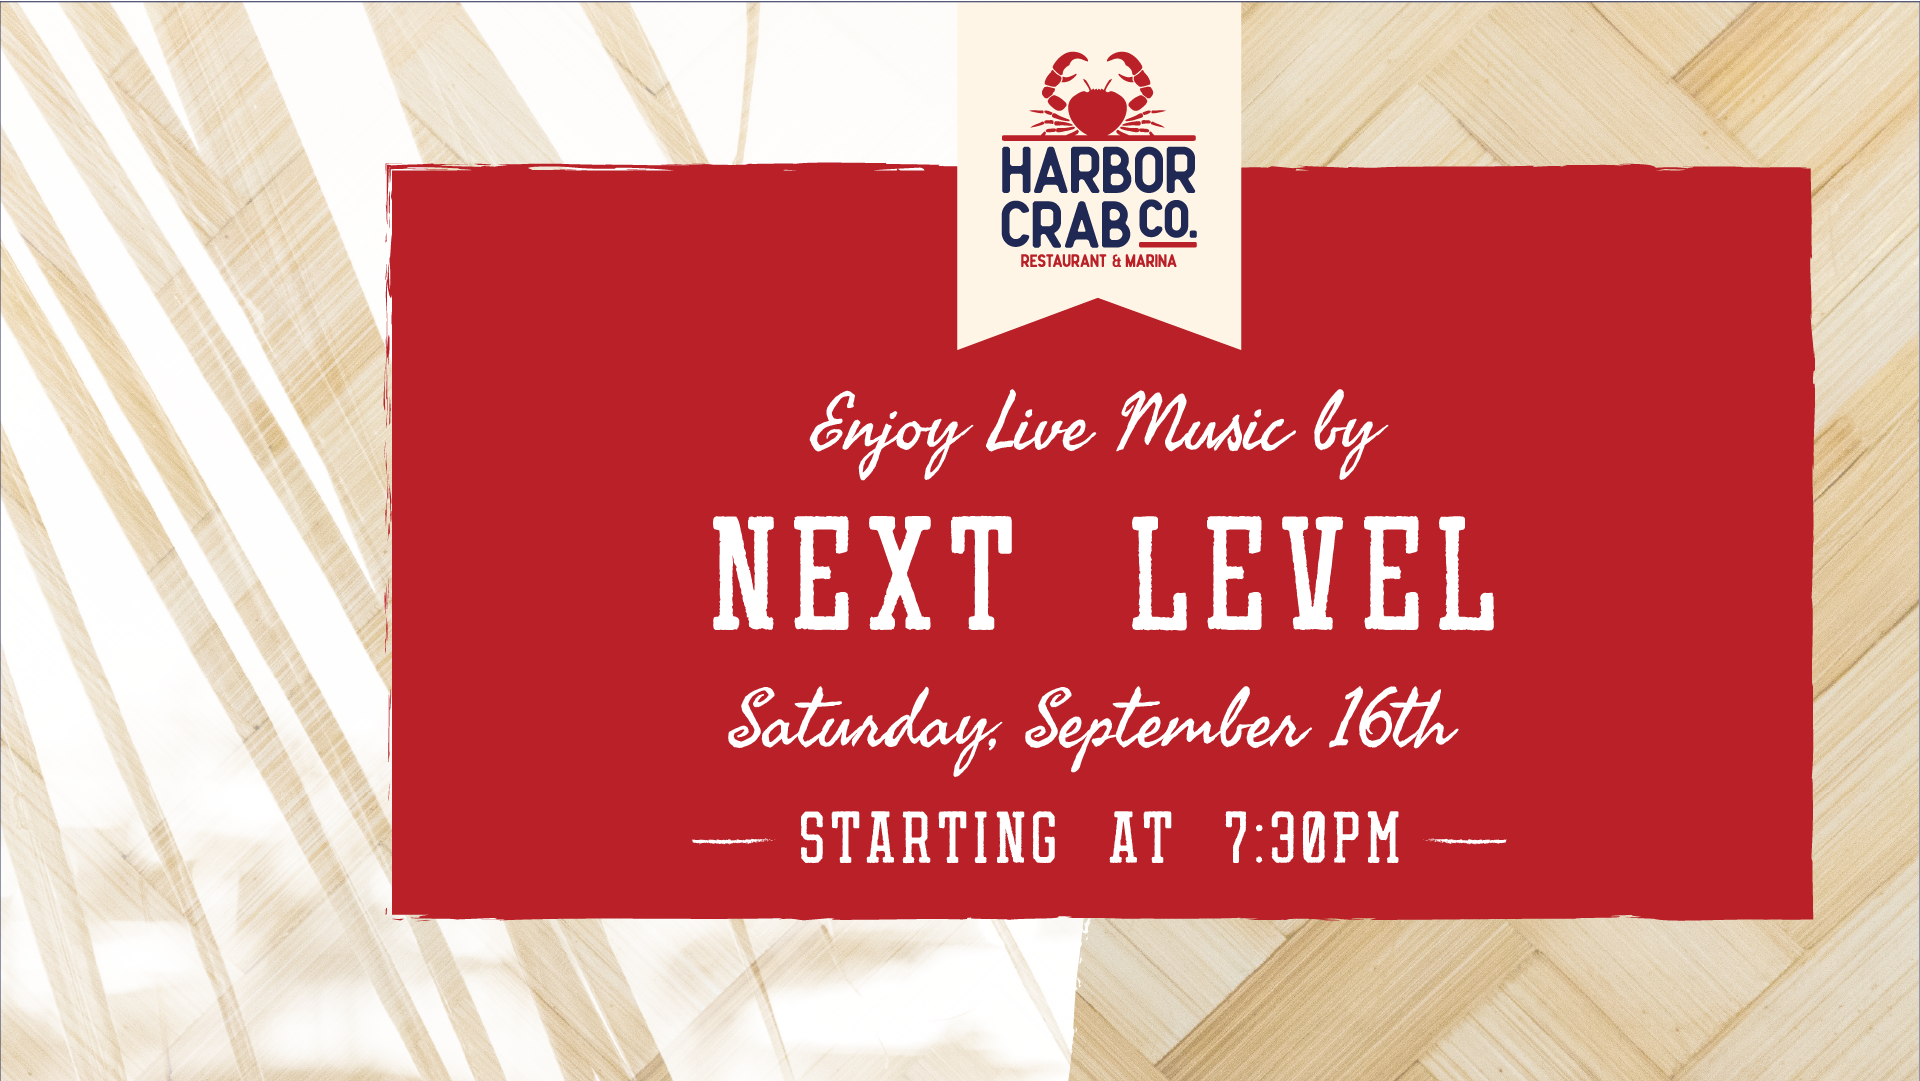 Live Music with Next Level on Saturday, September 16th at 7:30pm.